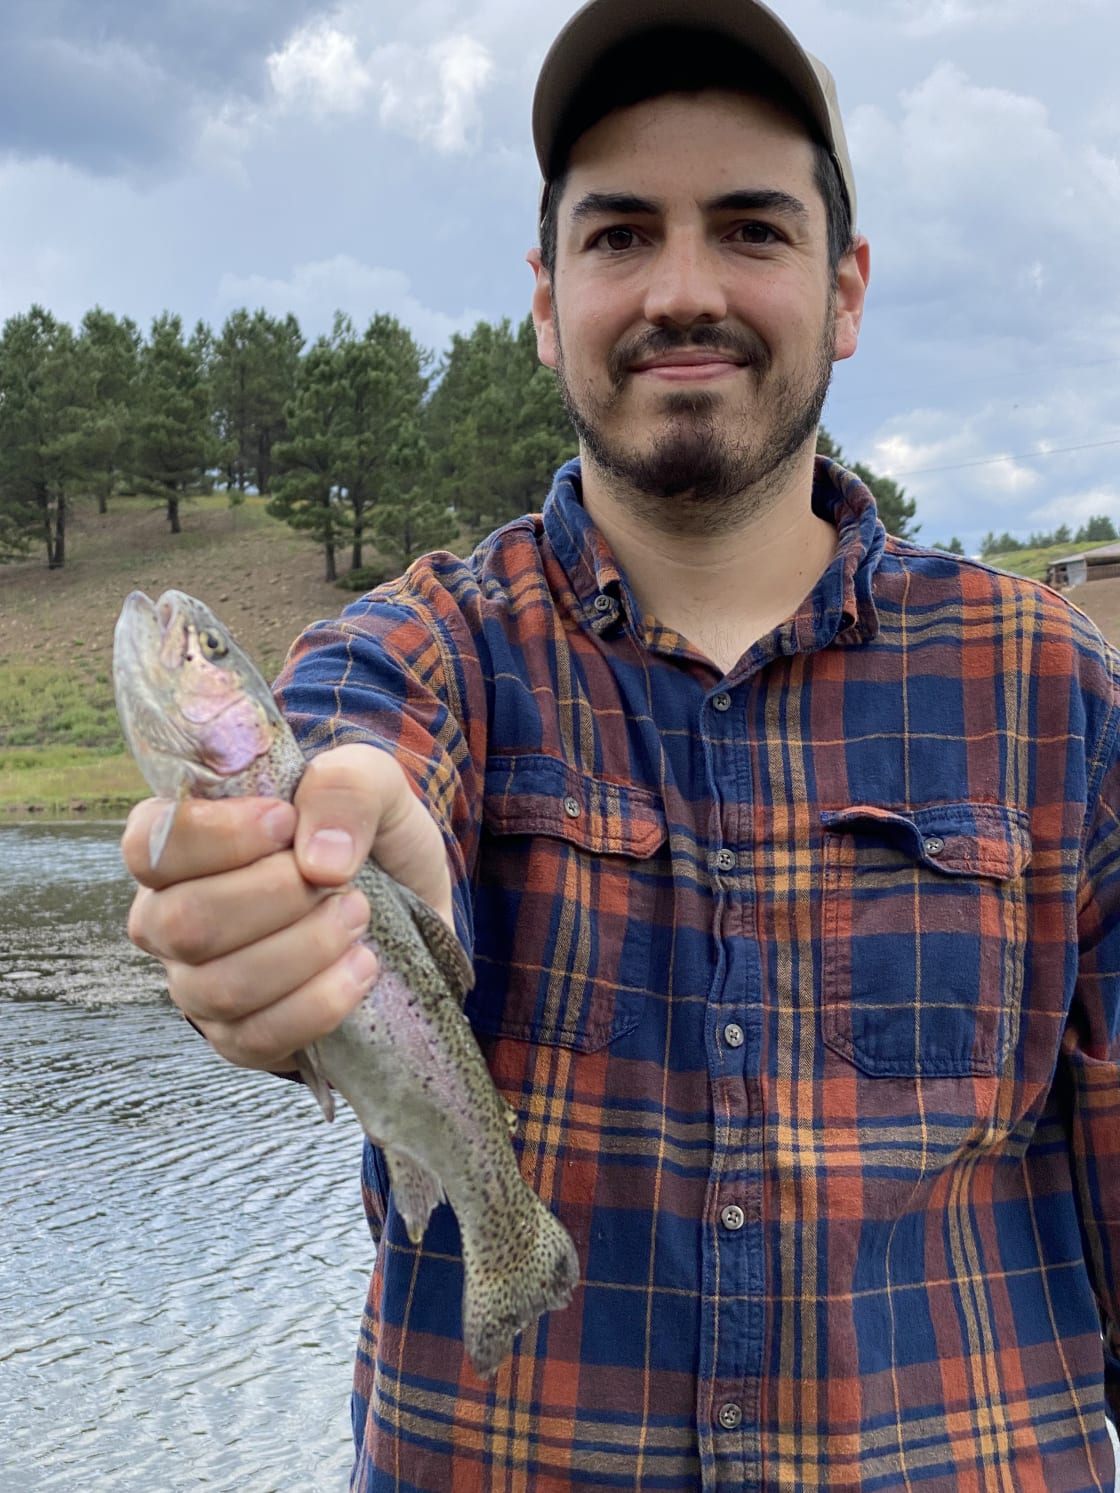 Fly fishing on the stocked pond produced an awesome trout dinner